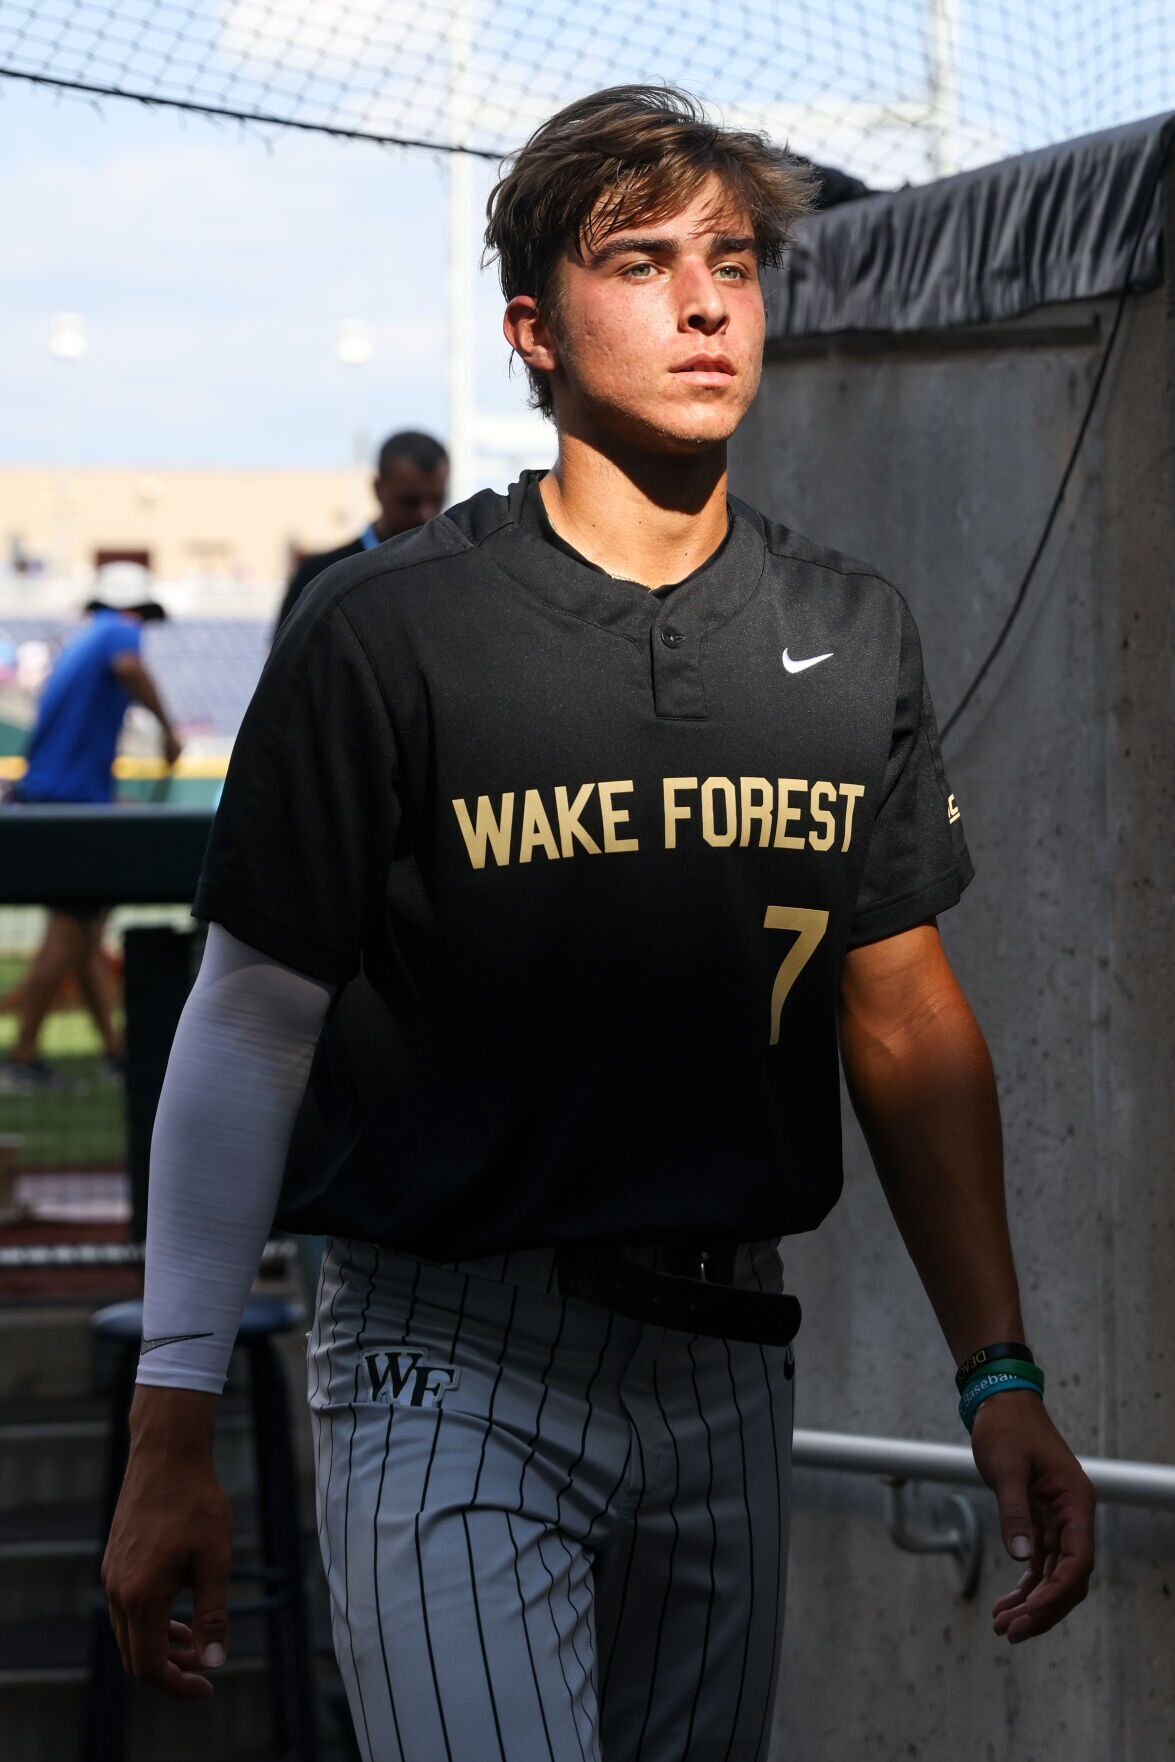 College World Series: Can anyone stop Wake Forest from making (and